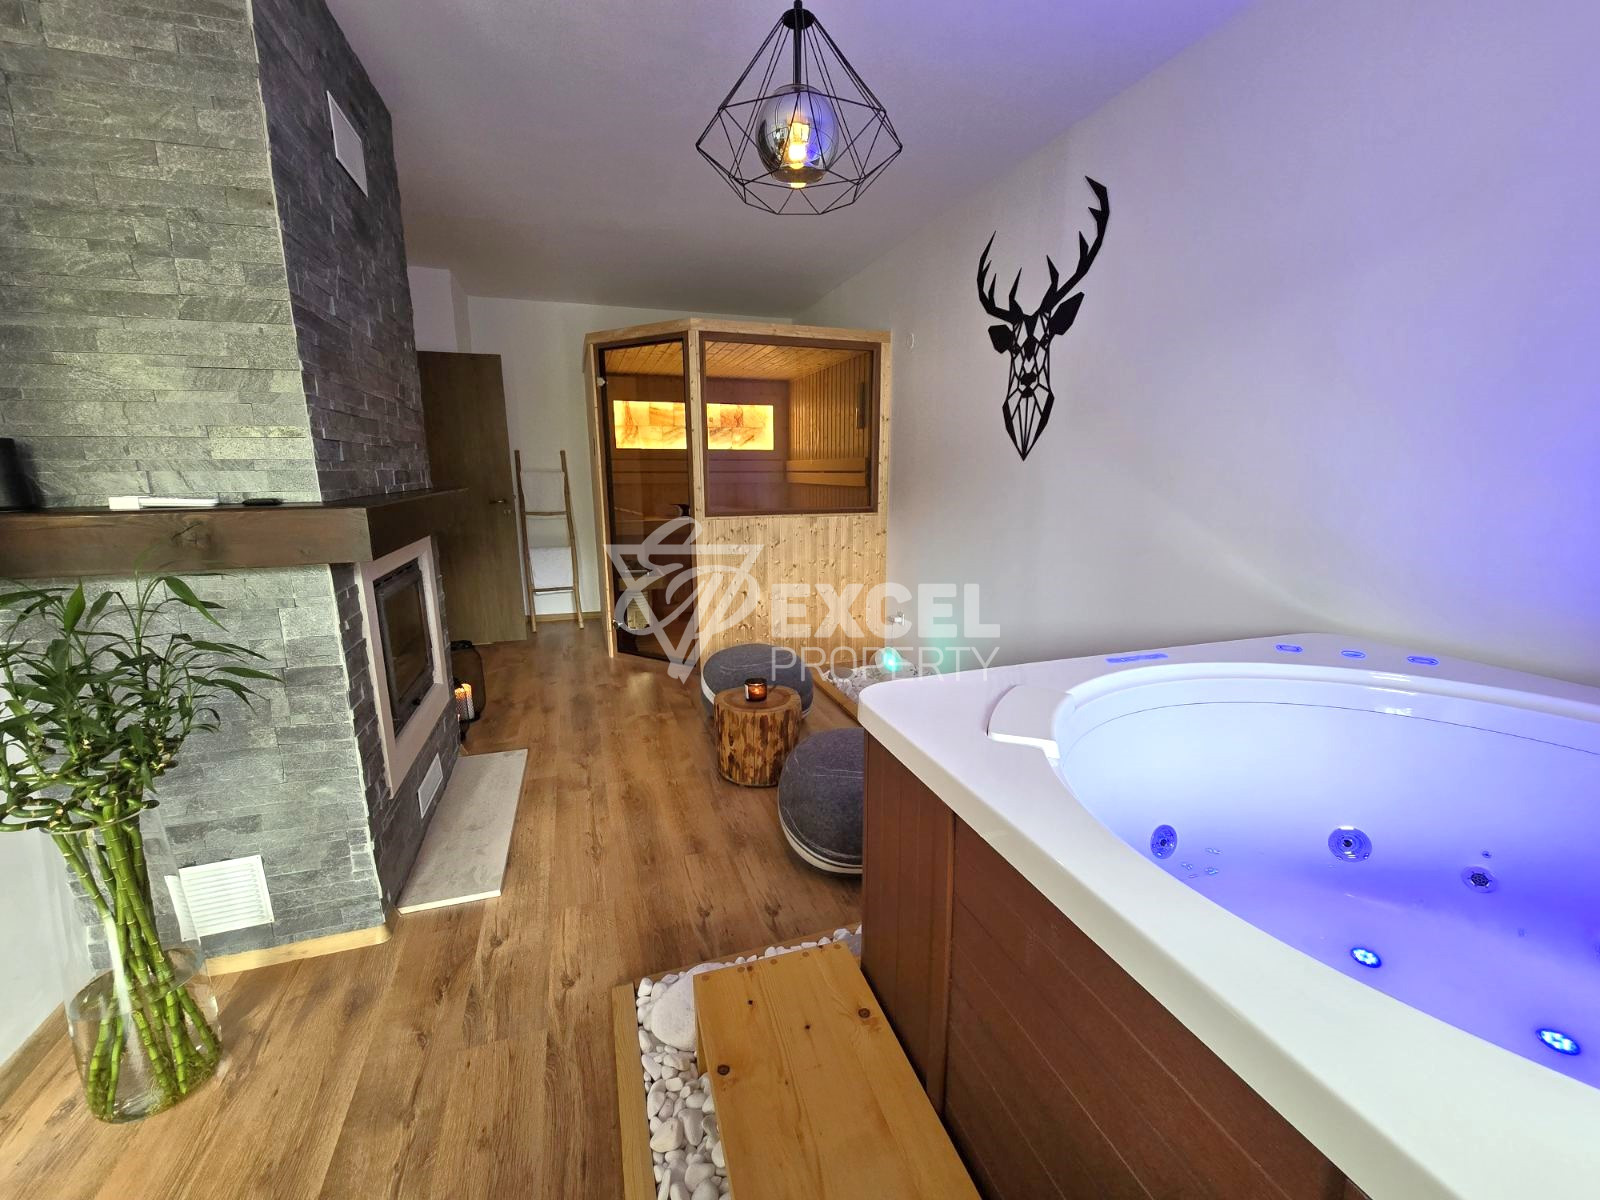 Luxury one-bedroom apartment with own SPA room with jacuzzi and sauna